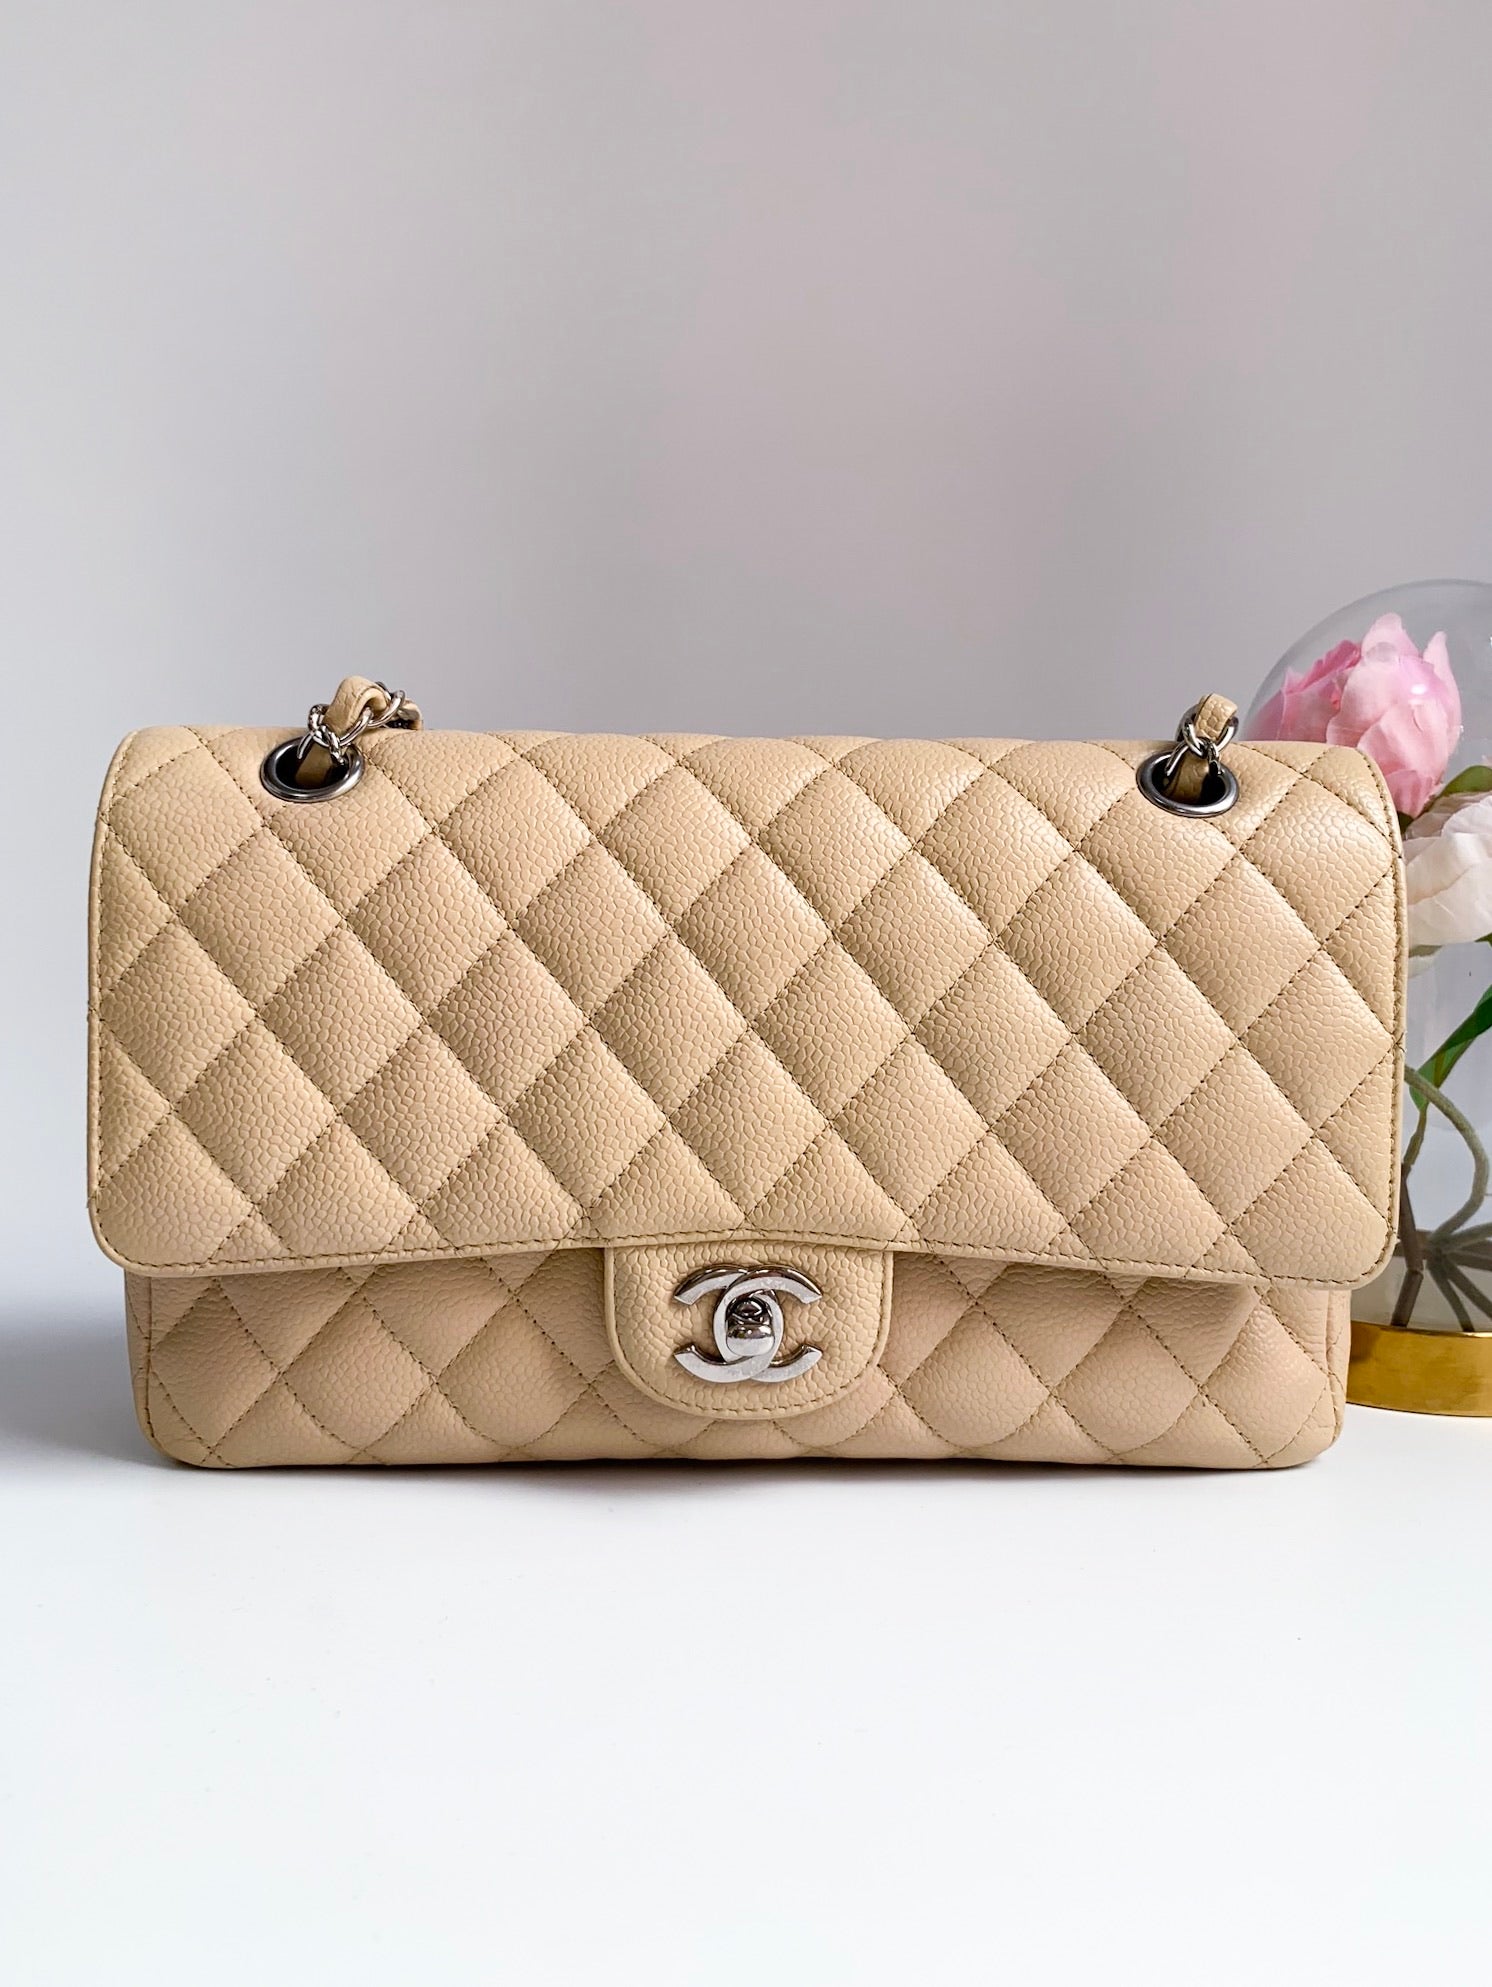 CHANEL Classic Beige Quilted Lambskin Silver Hardware Medium Double Flap Bag